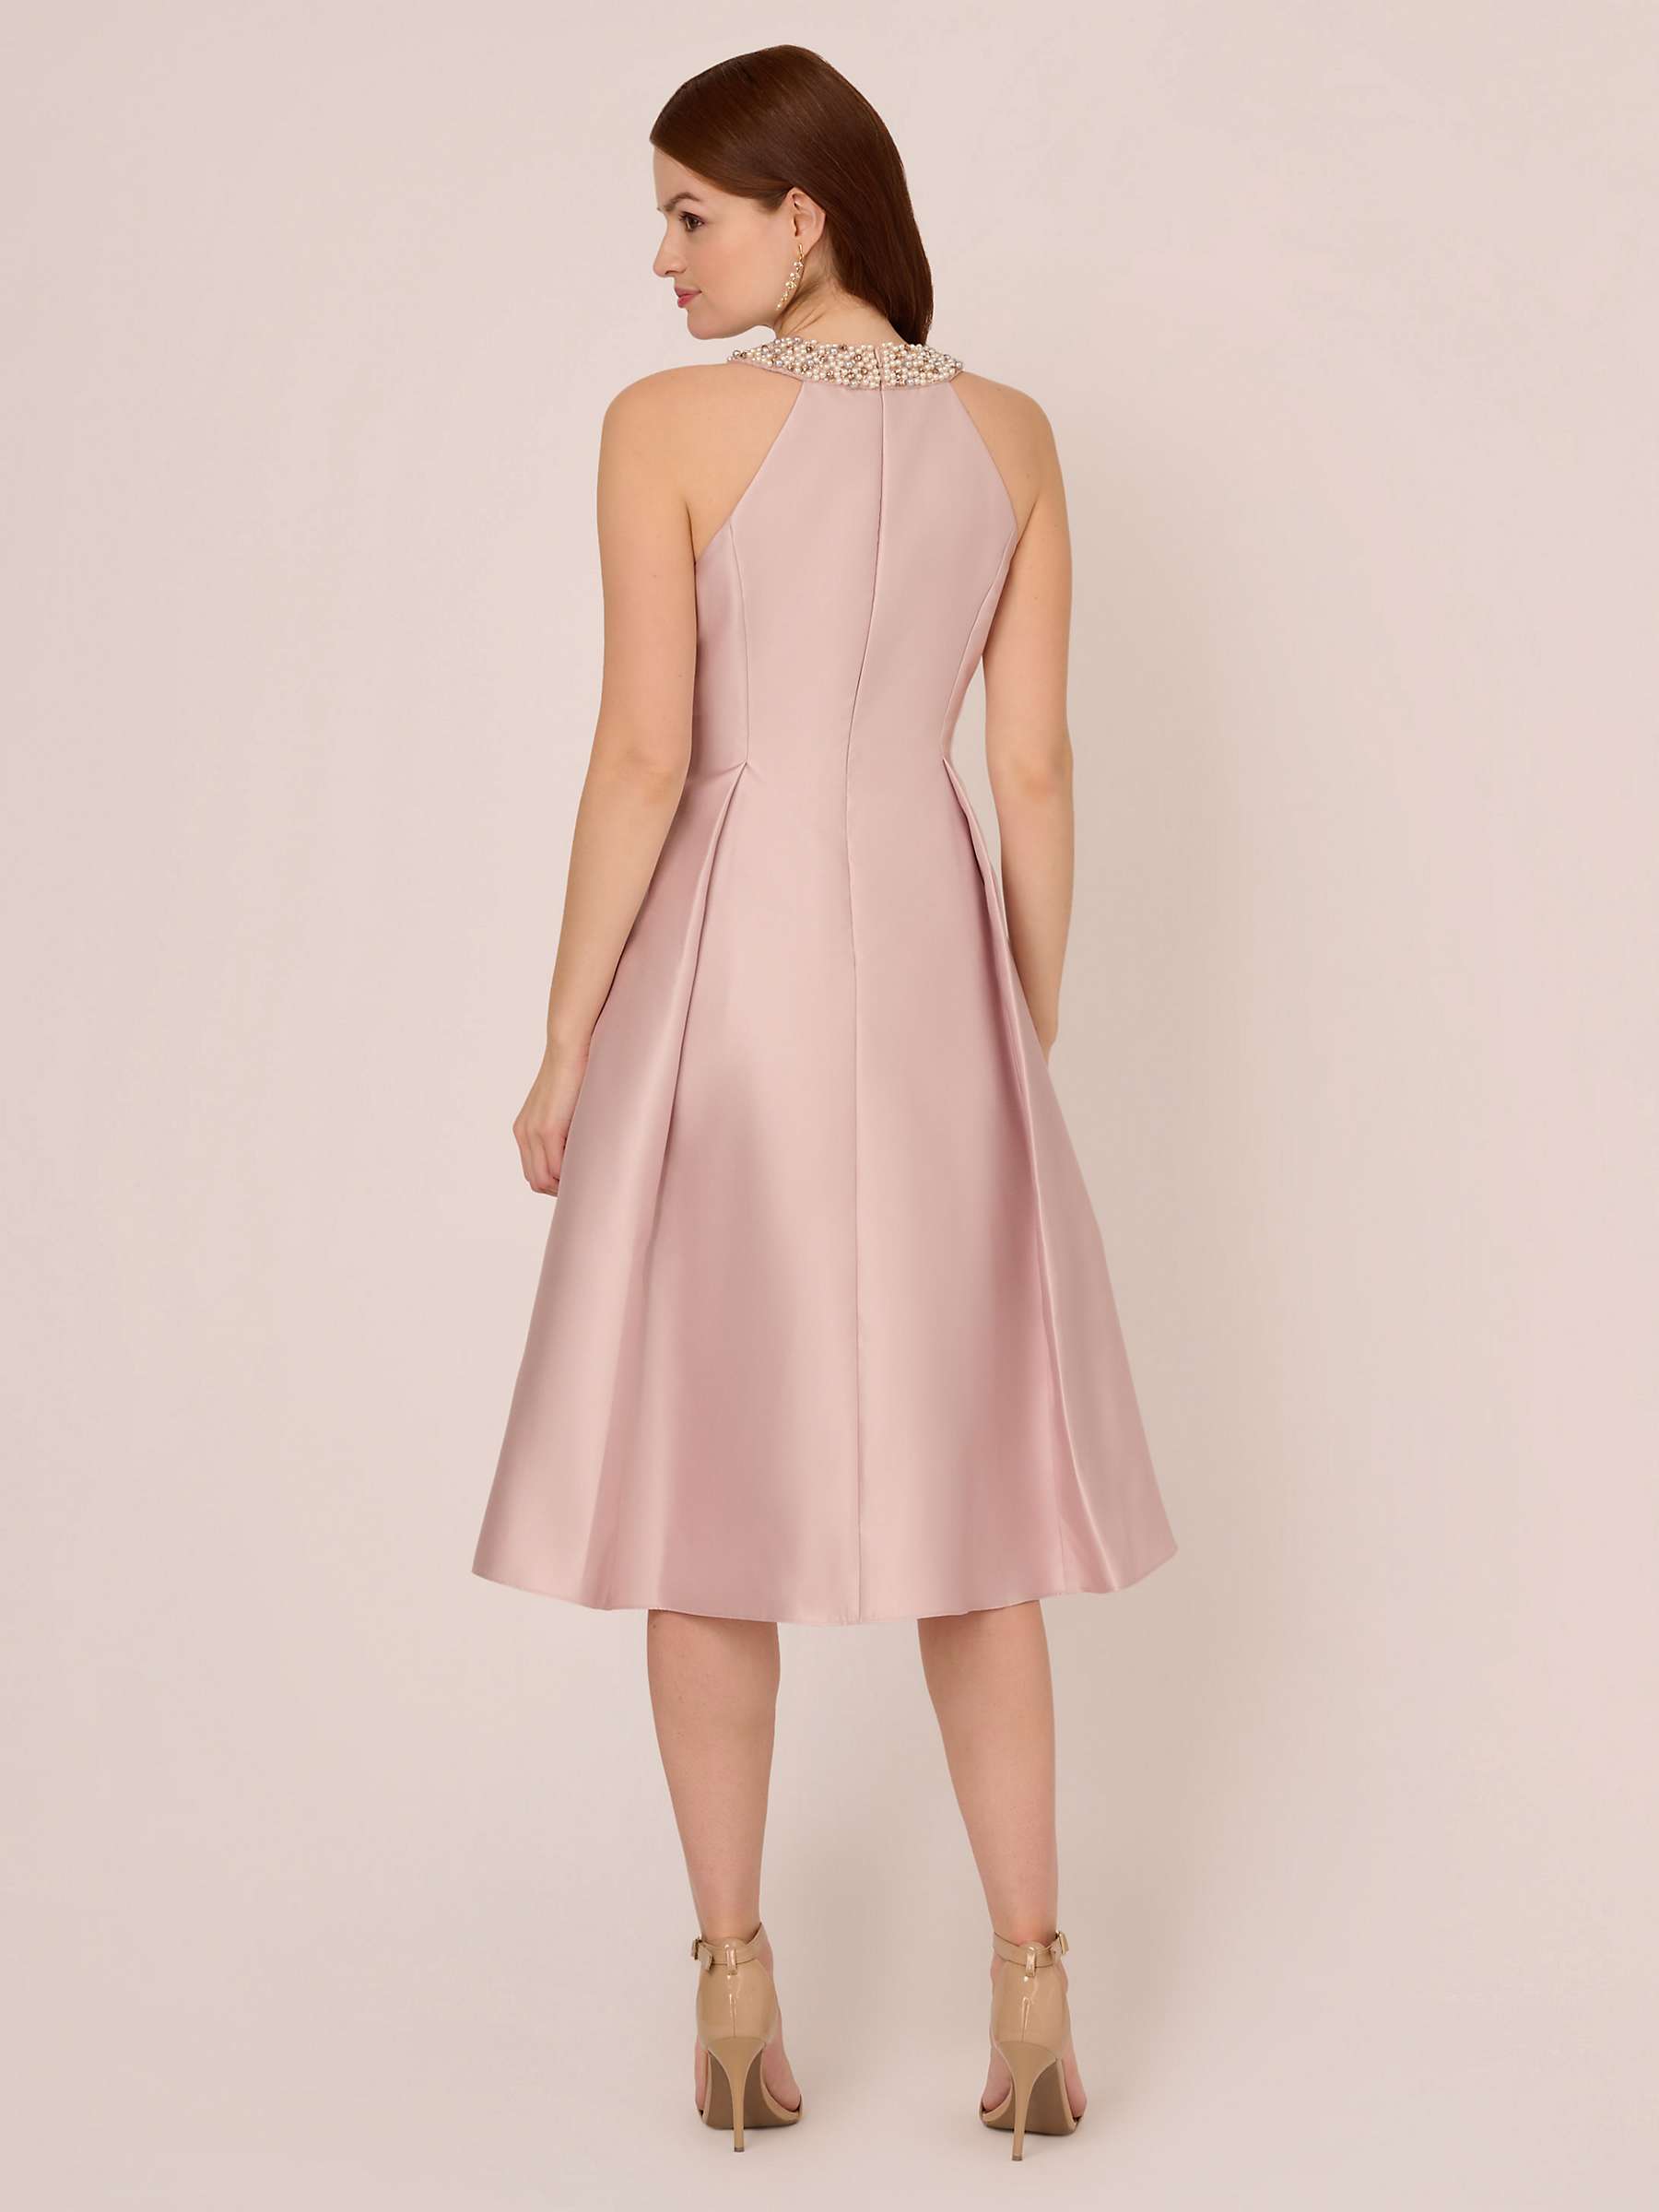 Buy Adrianna Papell Embellished Mikado Dress, Bellini Online at johnlewis.com